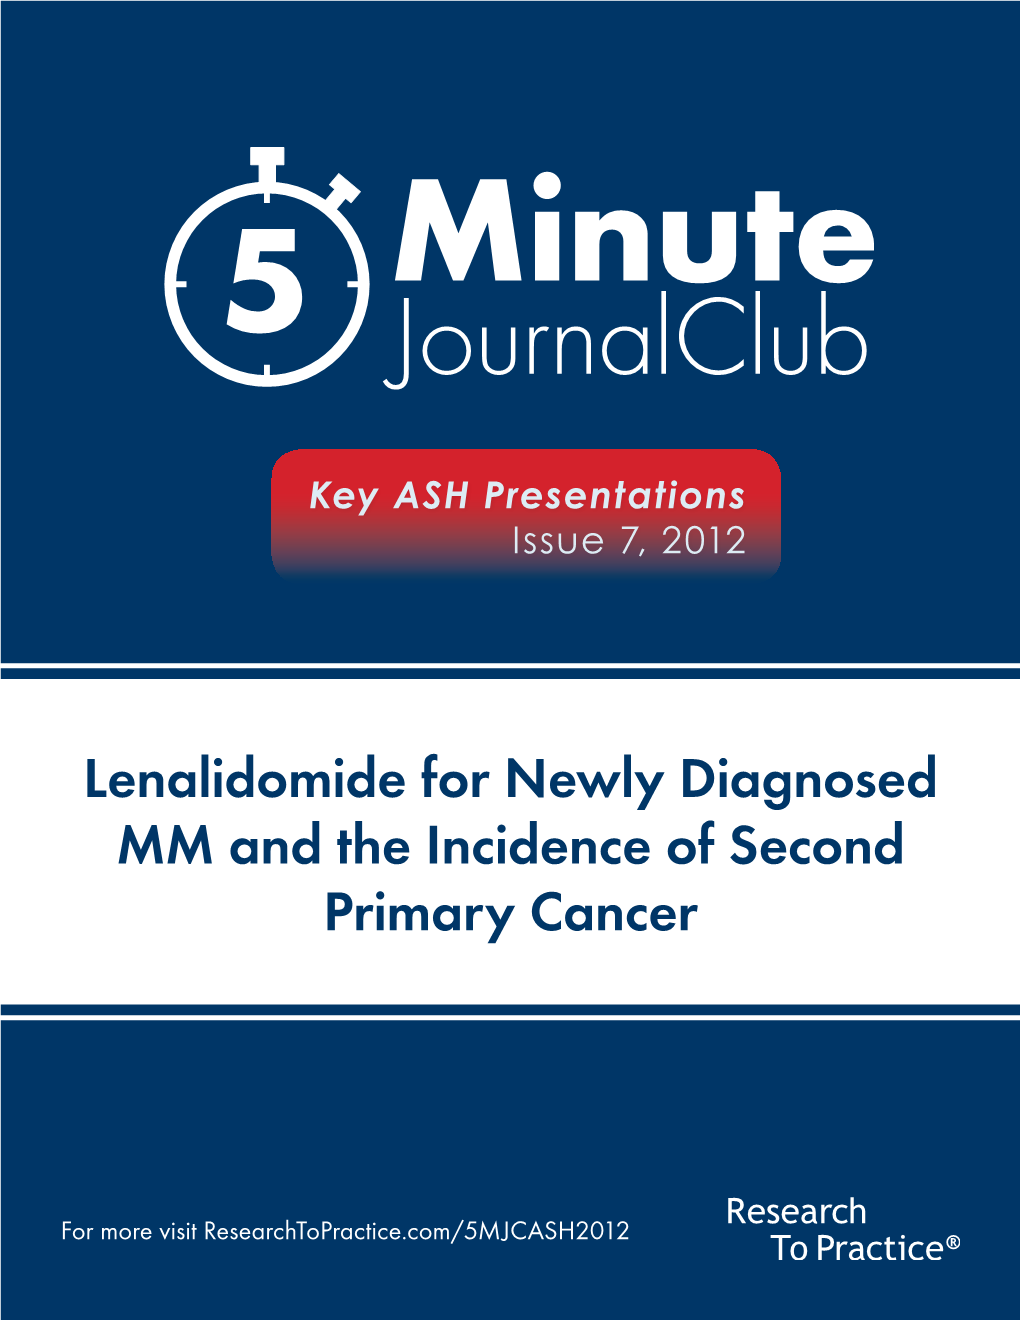 Lenalidomide for Newly Diagnosed MM and the Incidence of Second Primary Cancer